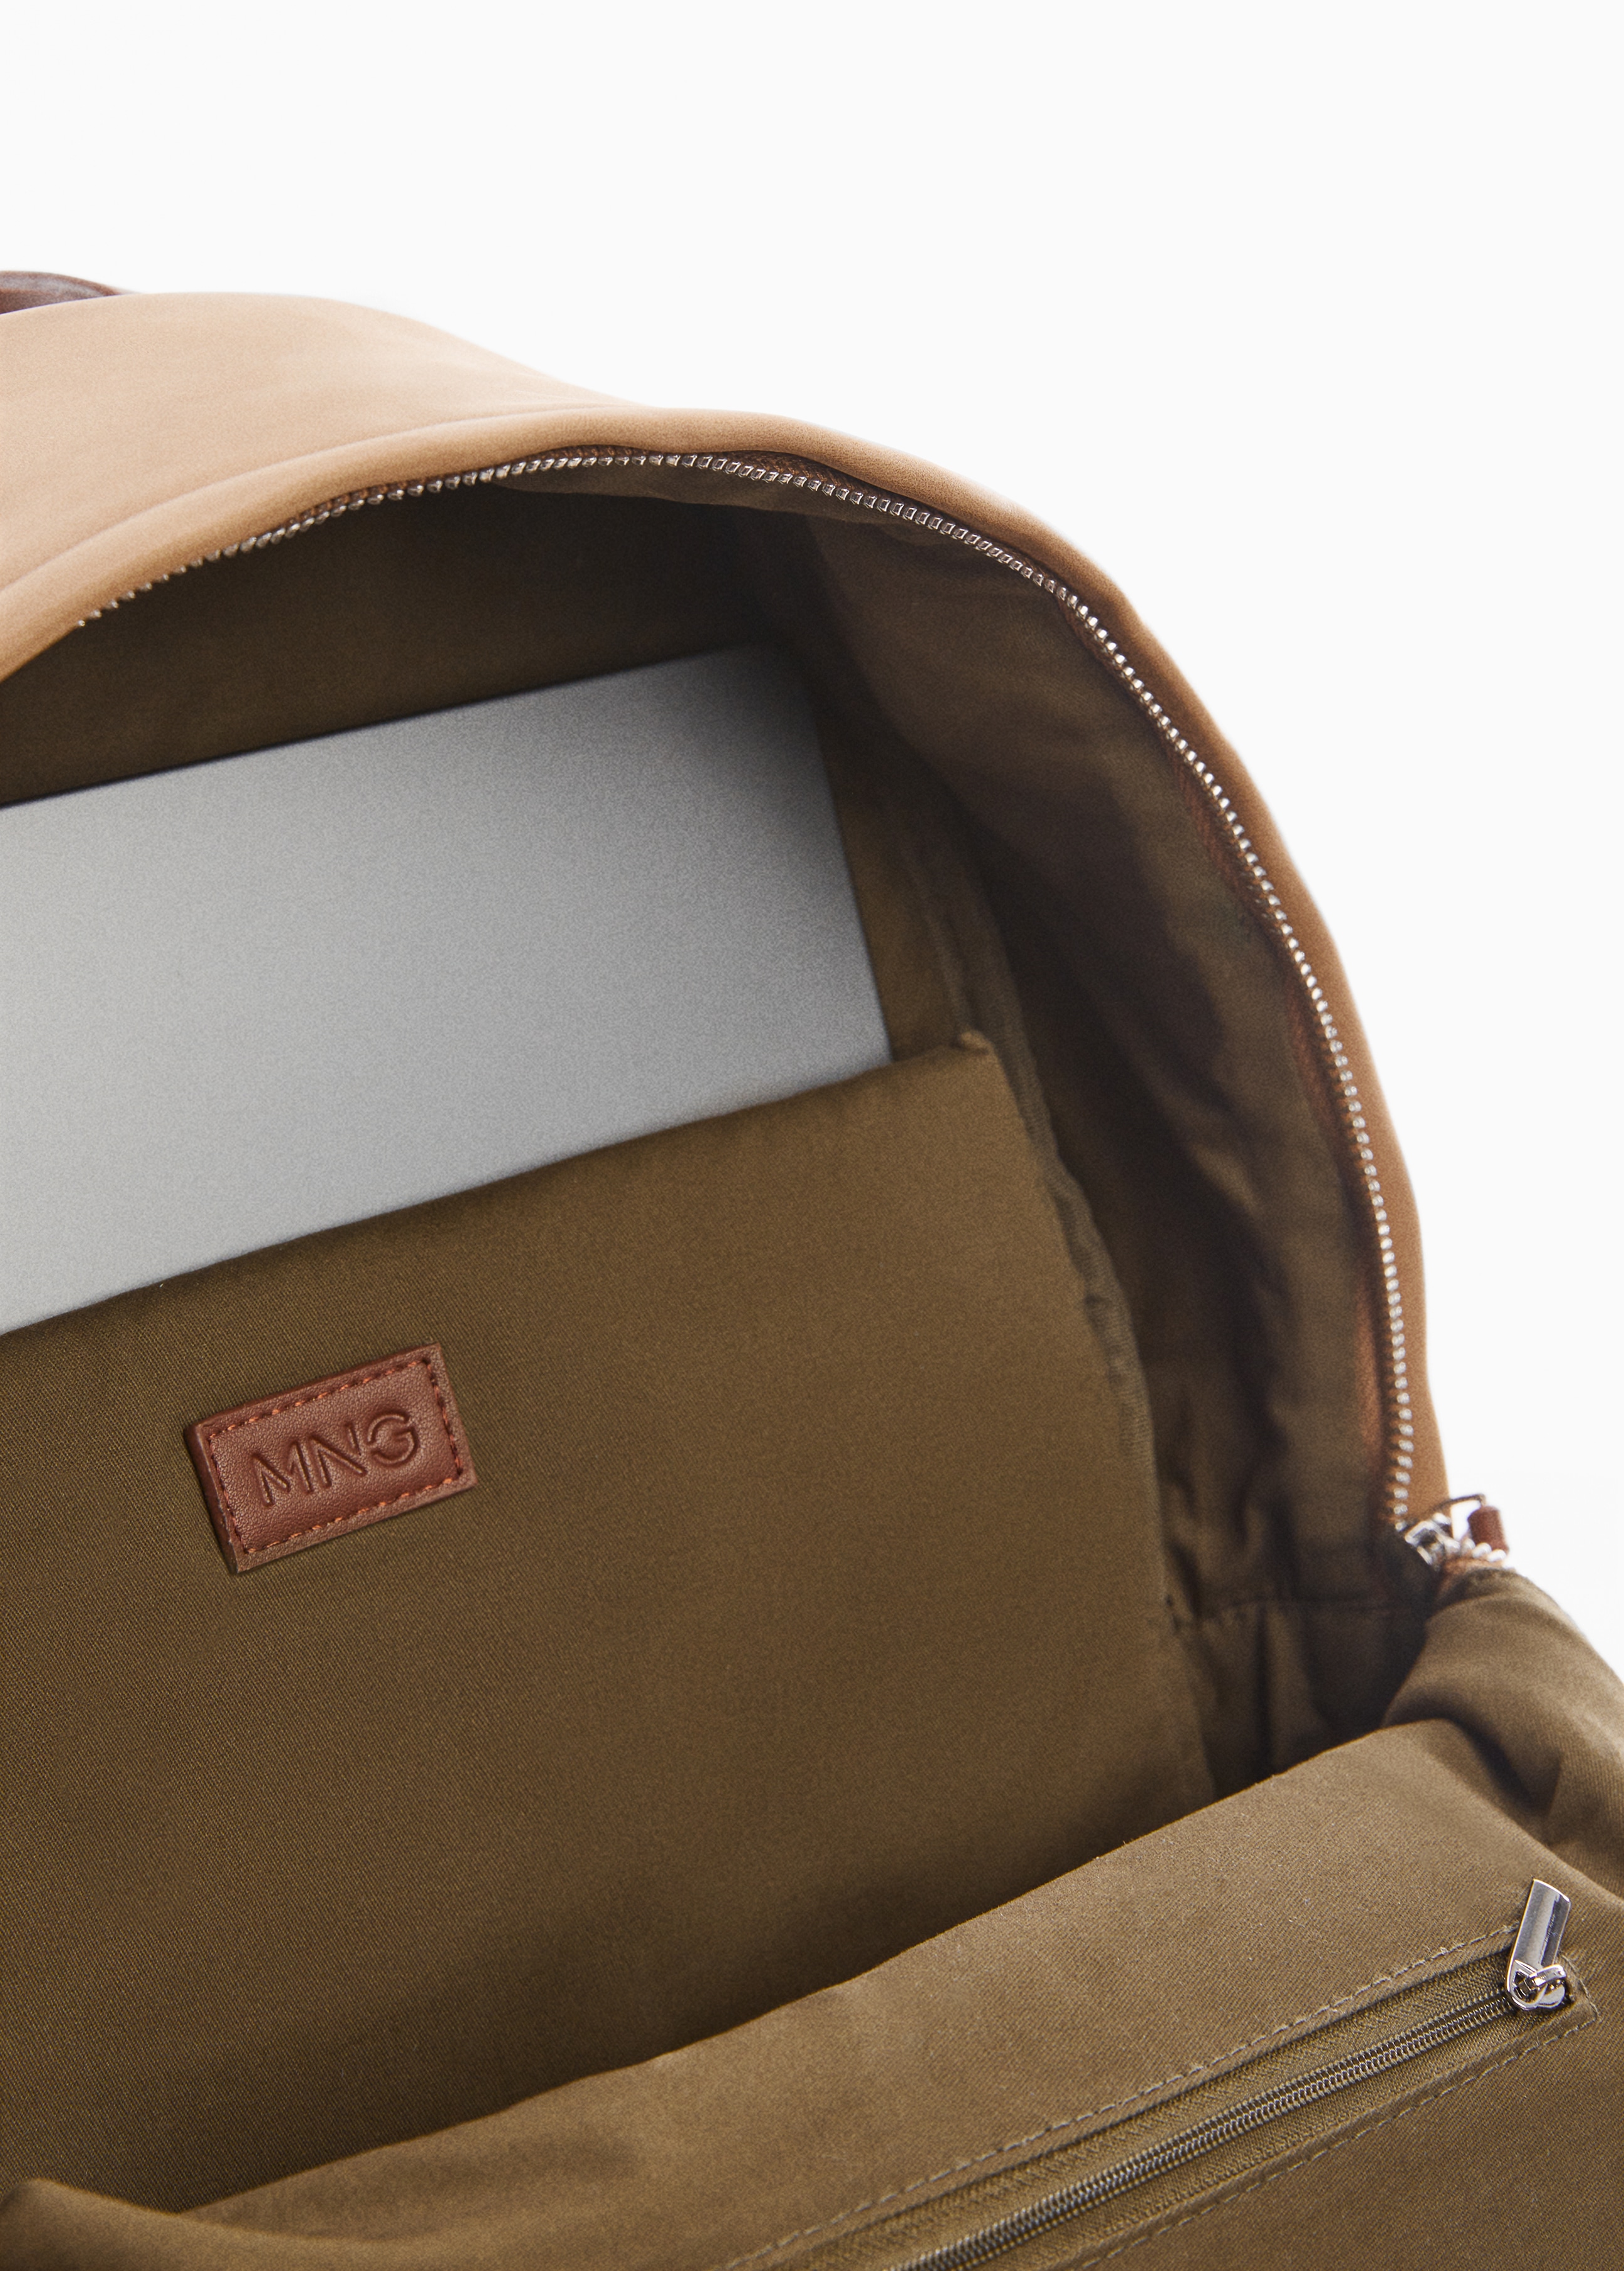 Canvas mixed backpack